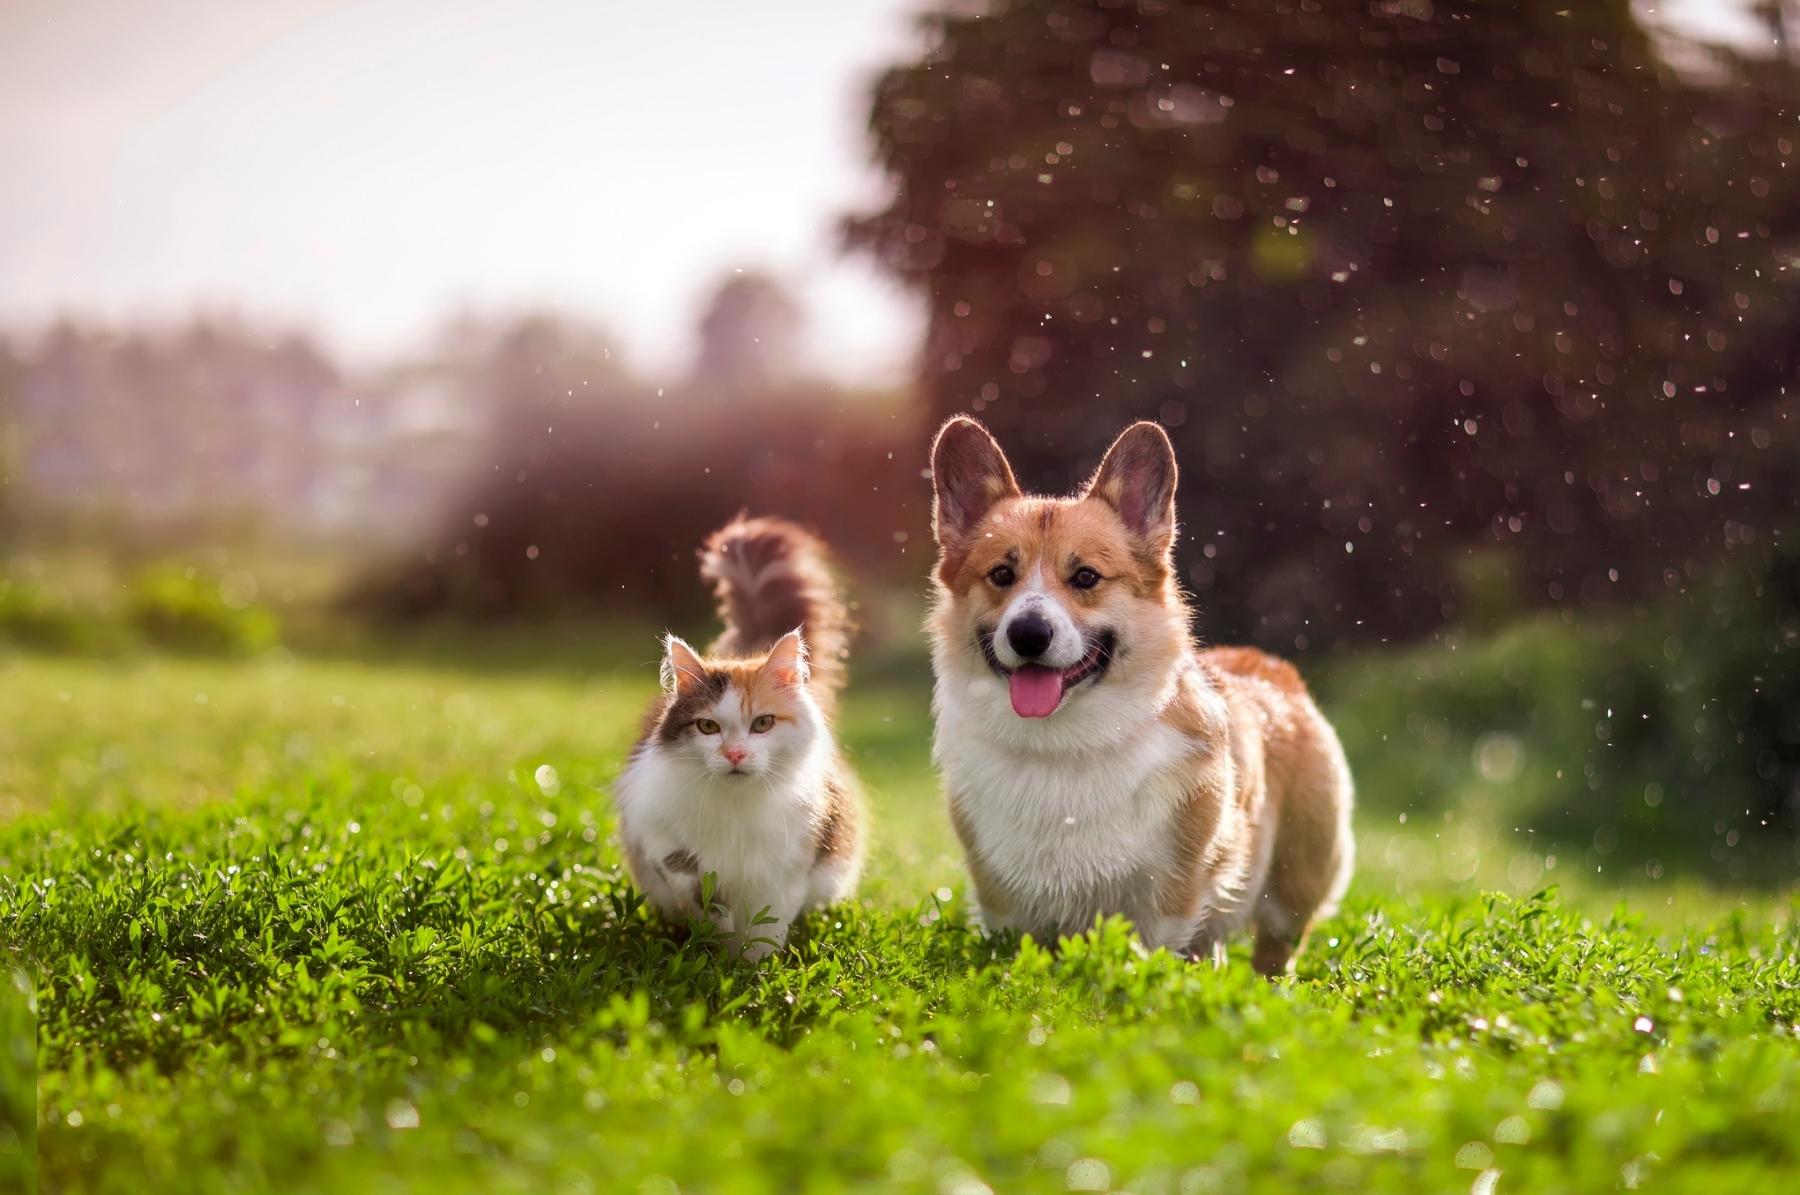 cat and dog on grass